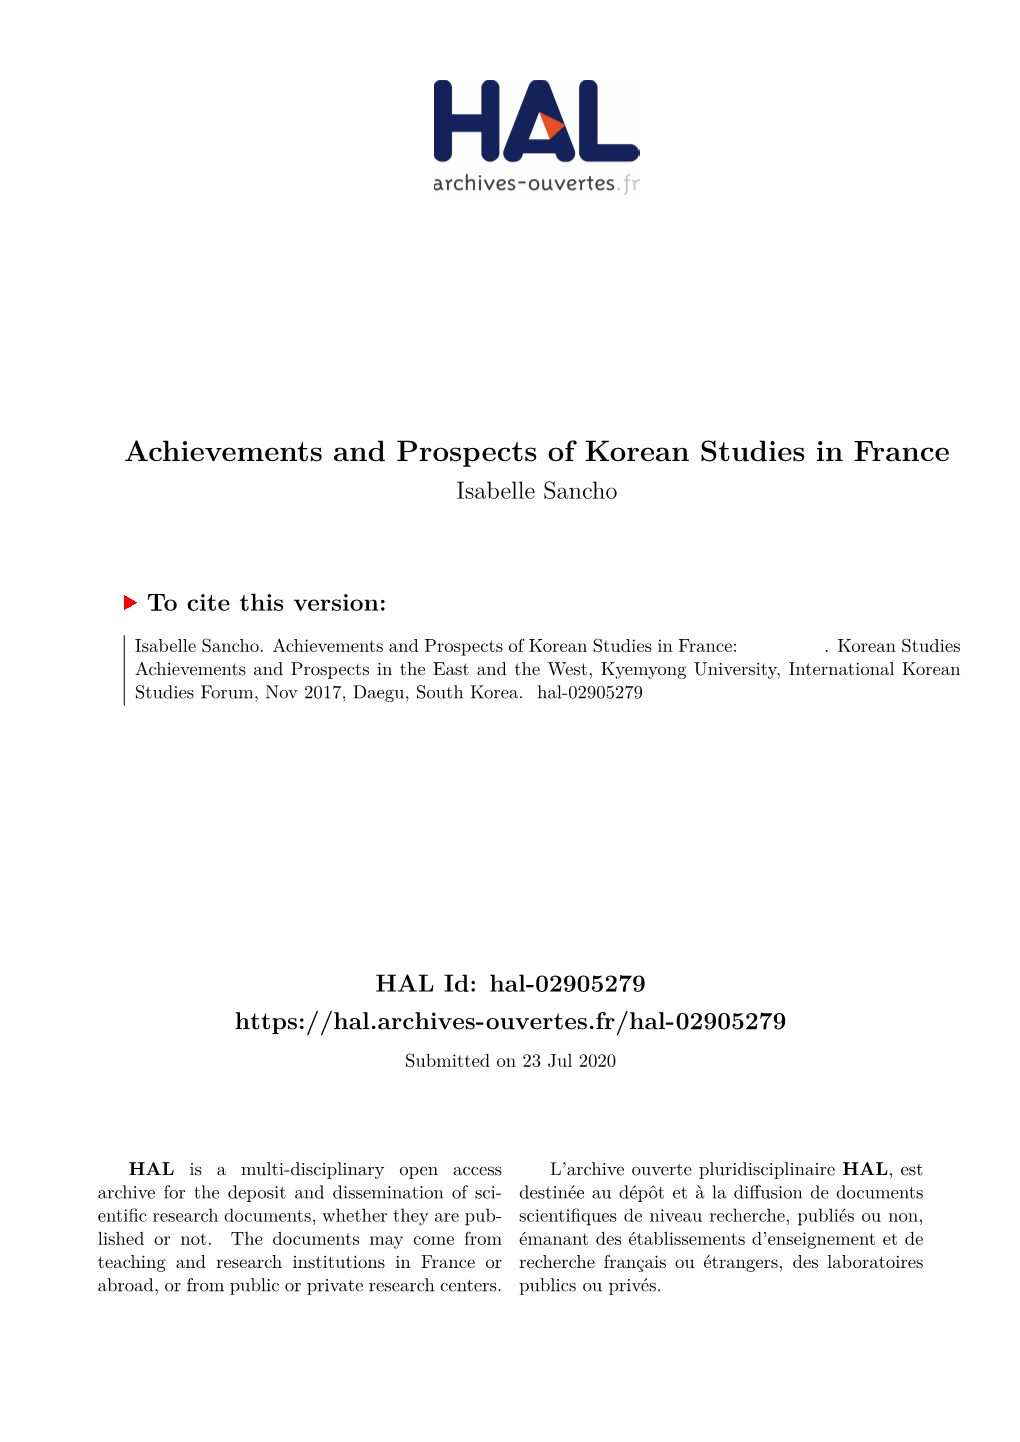 Achievements and Prospects of Korean Studies in France Isabelle Sancho